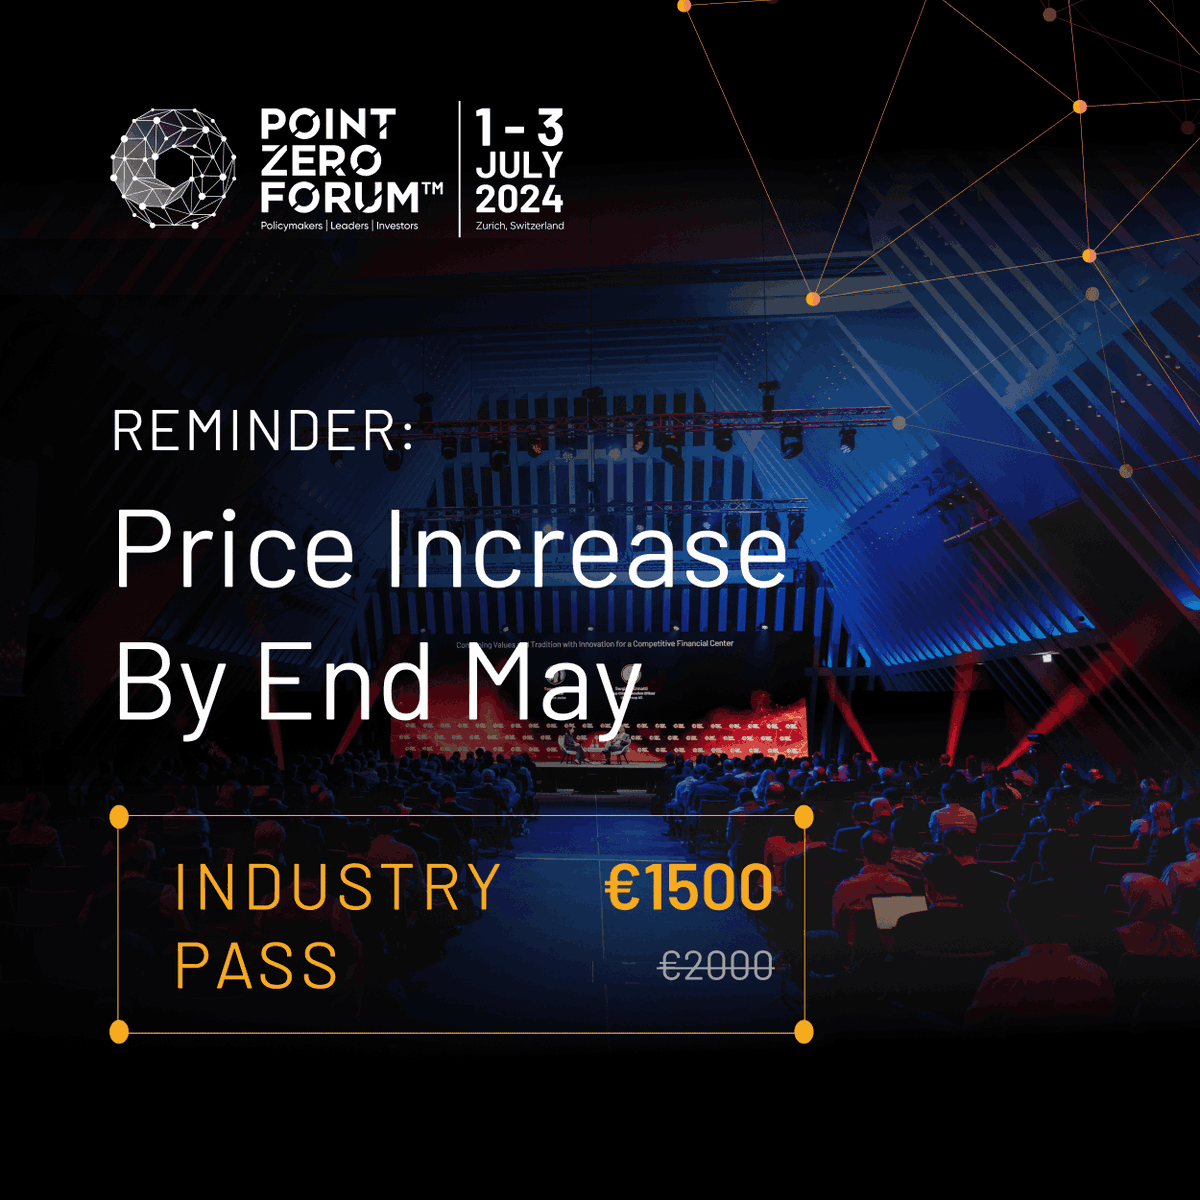 €1,500 → €2,000 on May 31st! Register now to secure your #PZF2024 Industry Pass at the current rate of €1,500 and ensure uninterrupted access to all event features and networking opportunities before the deadline. Secure your pass now: hubs.ly/Q02s3l_R0